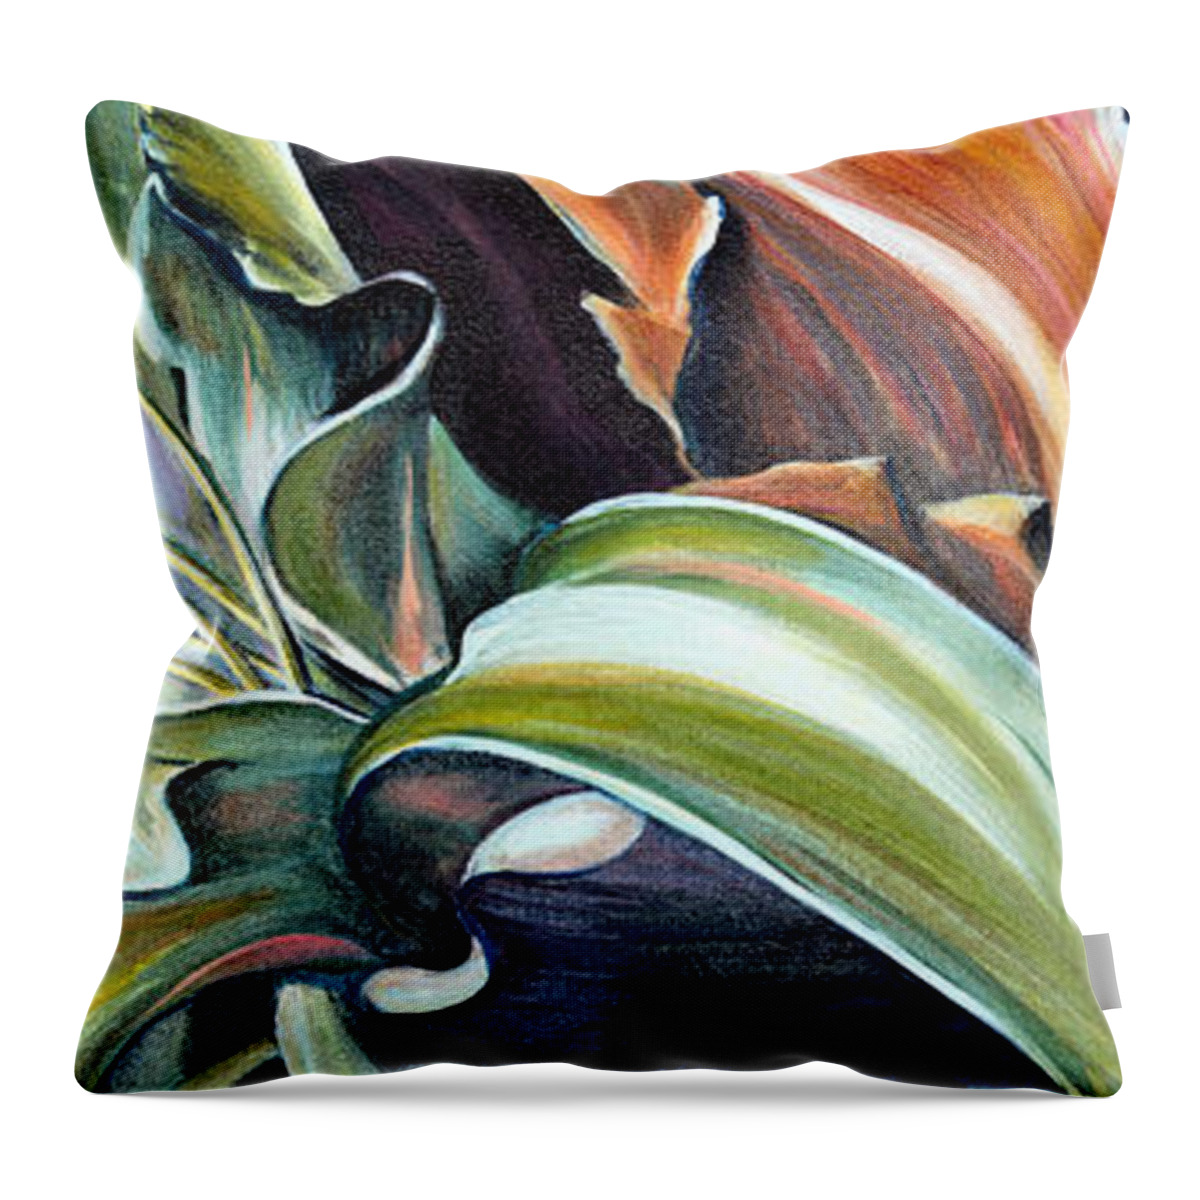 Flower Throw Pillow featuring the painting Sara's Request by Trina Teele